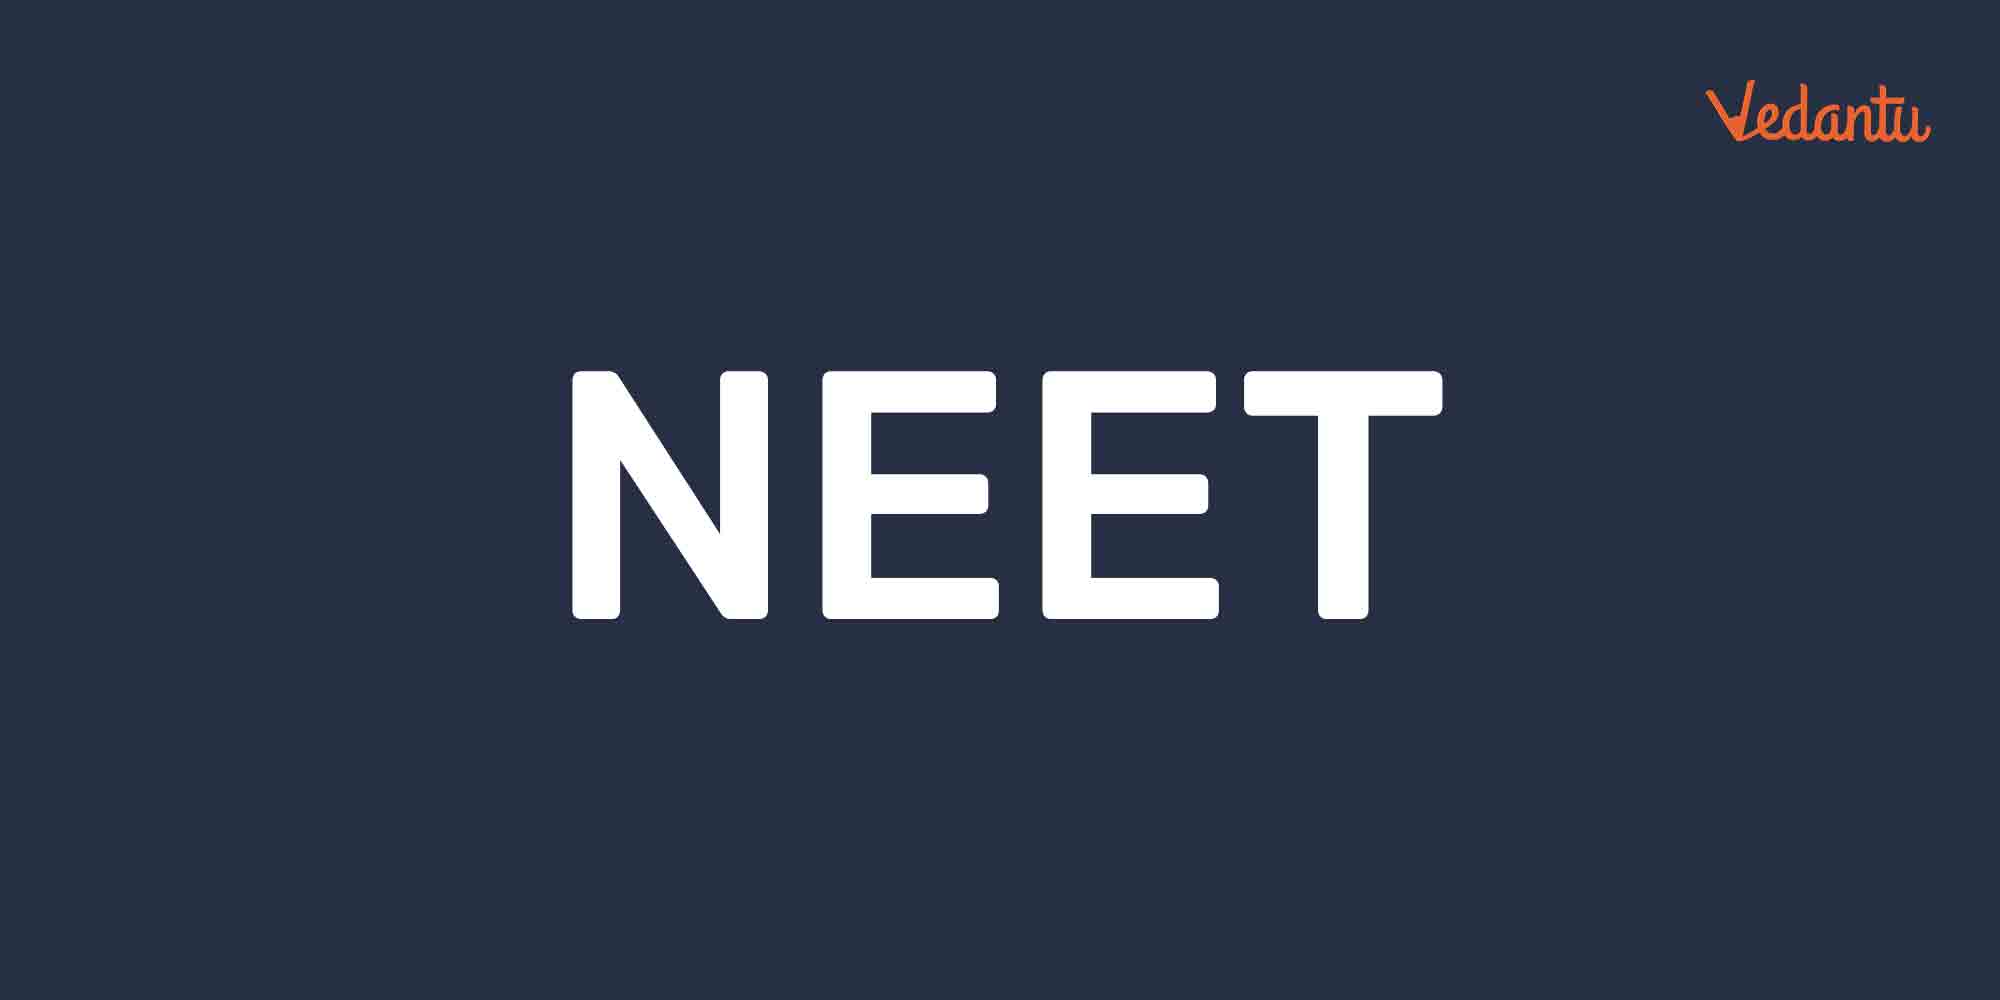 What is The Daily Timetable Of NEET Aspirants?